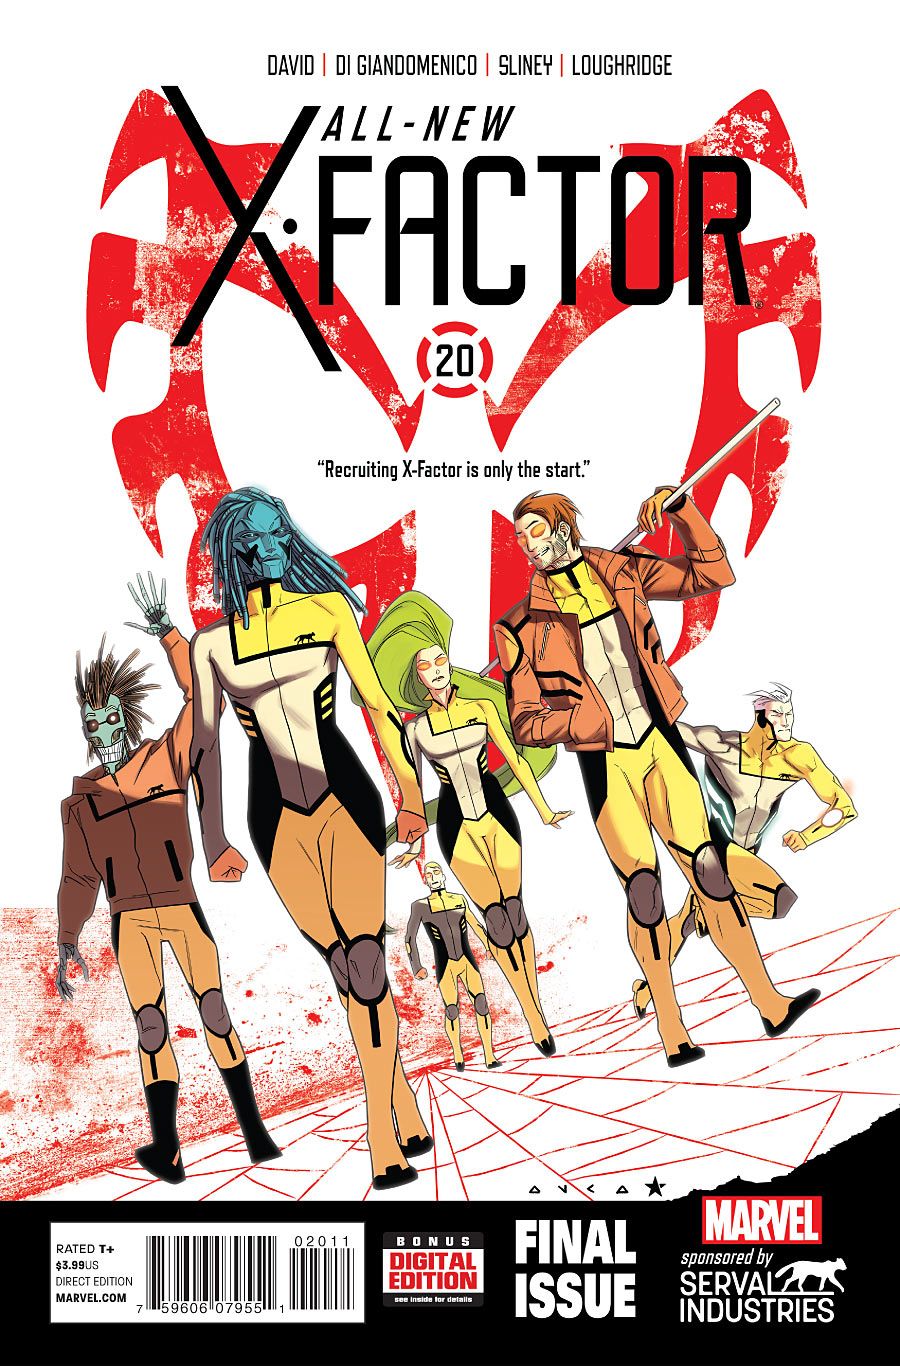 All New X-factor #20 Comic